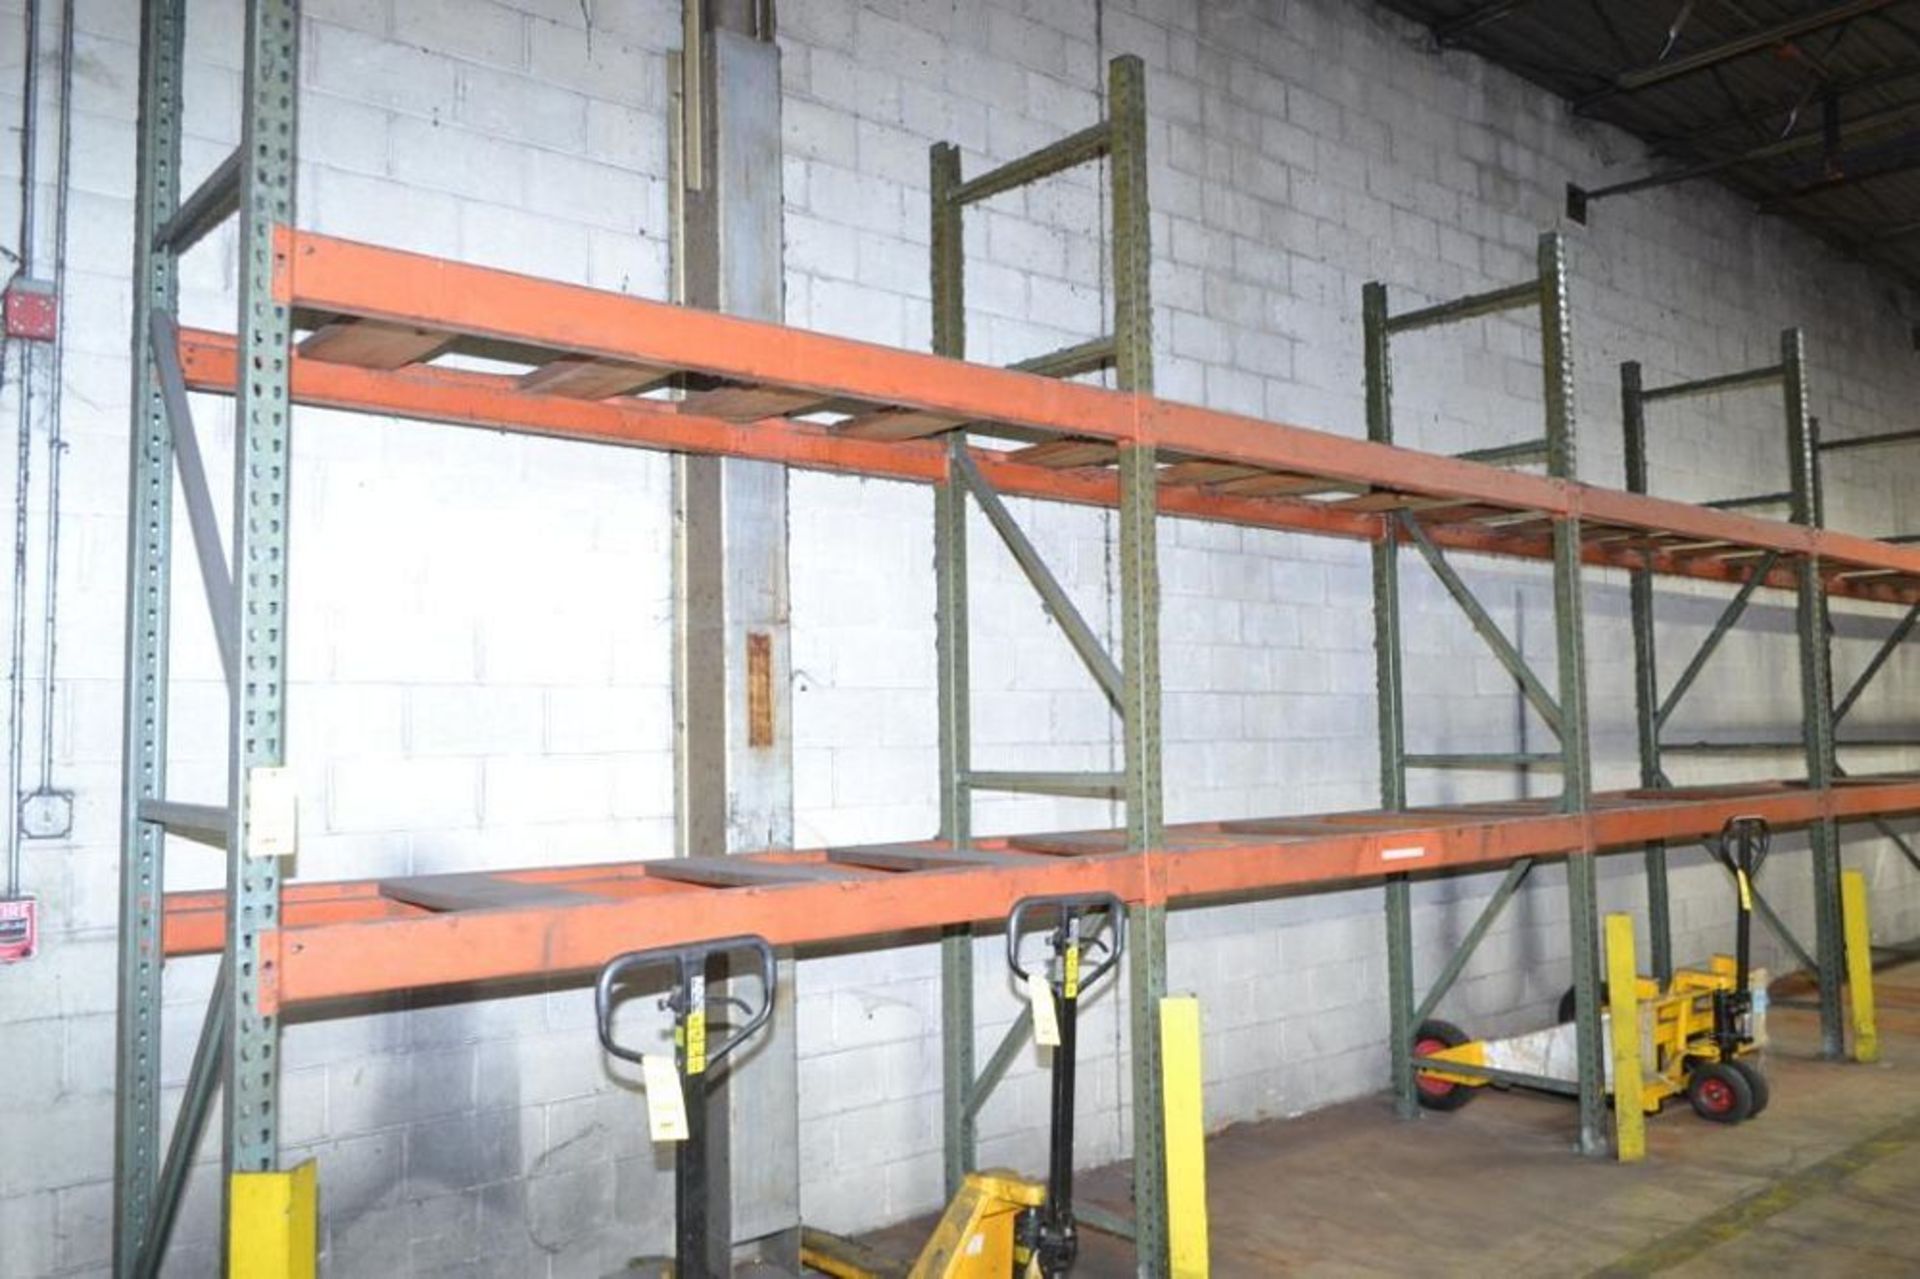 LOT: (18) Sections 12 ft. High x 8 ft. Wide x 36 in. Deep Pallet Rack (no contents - delay removal)